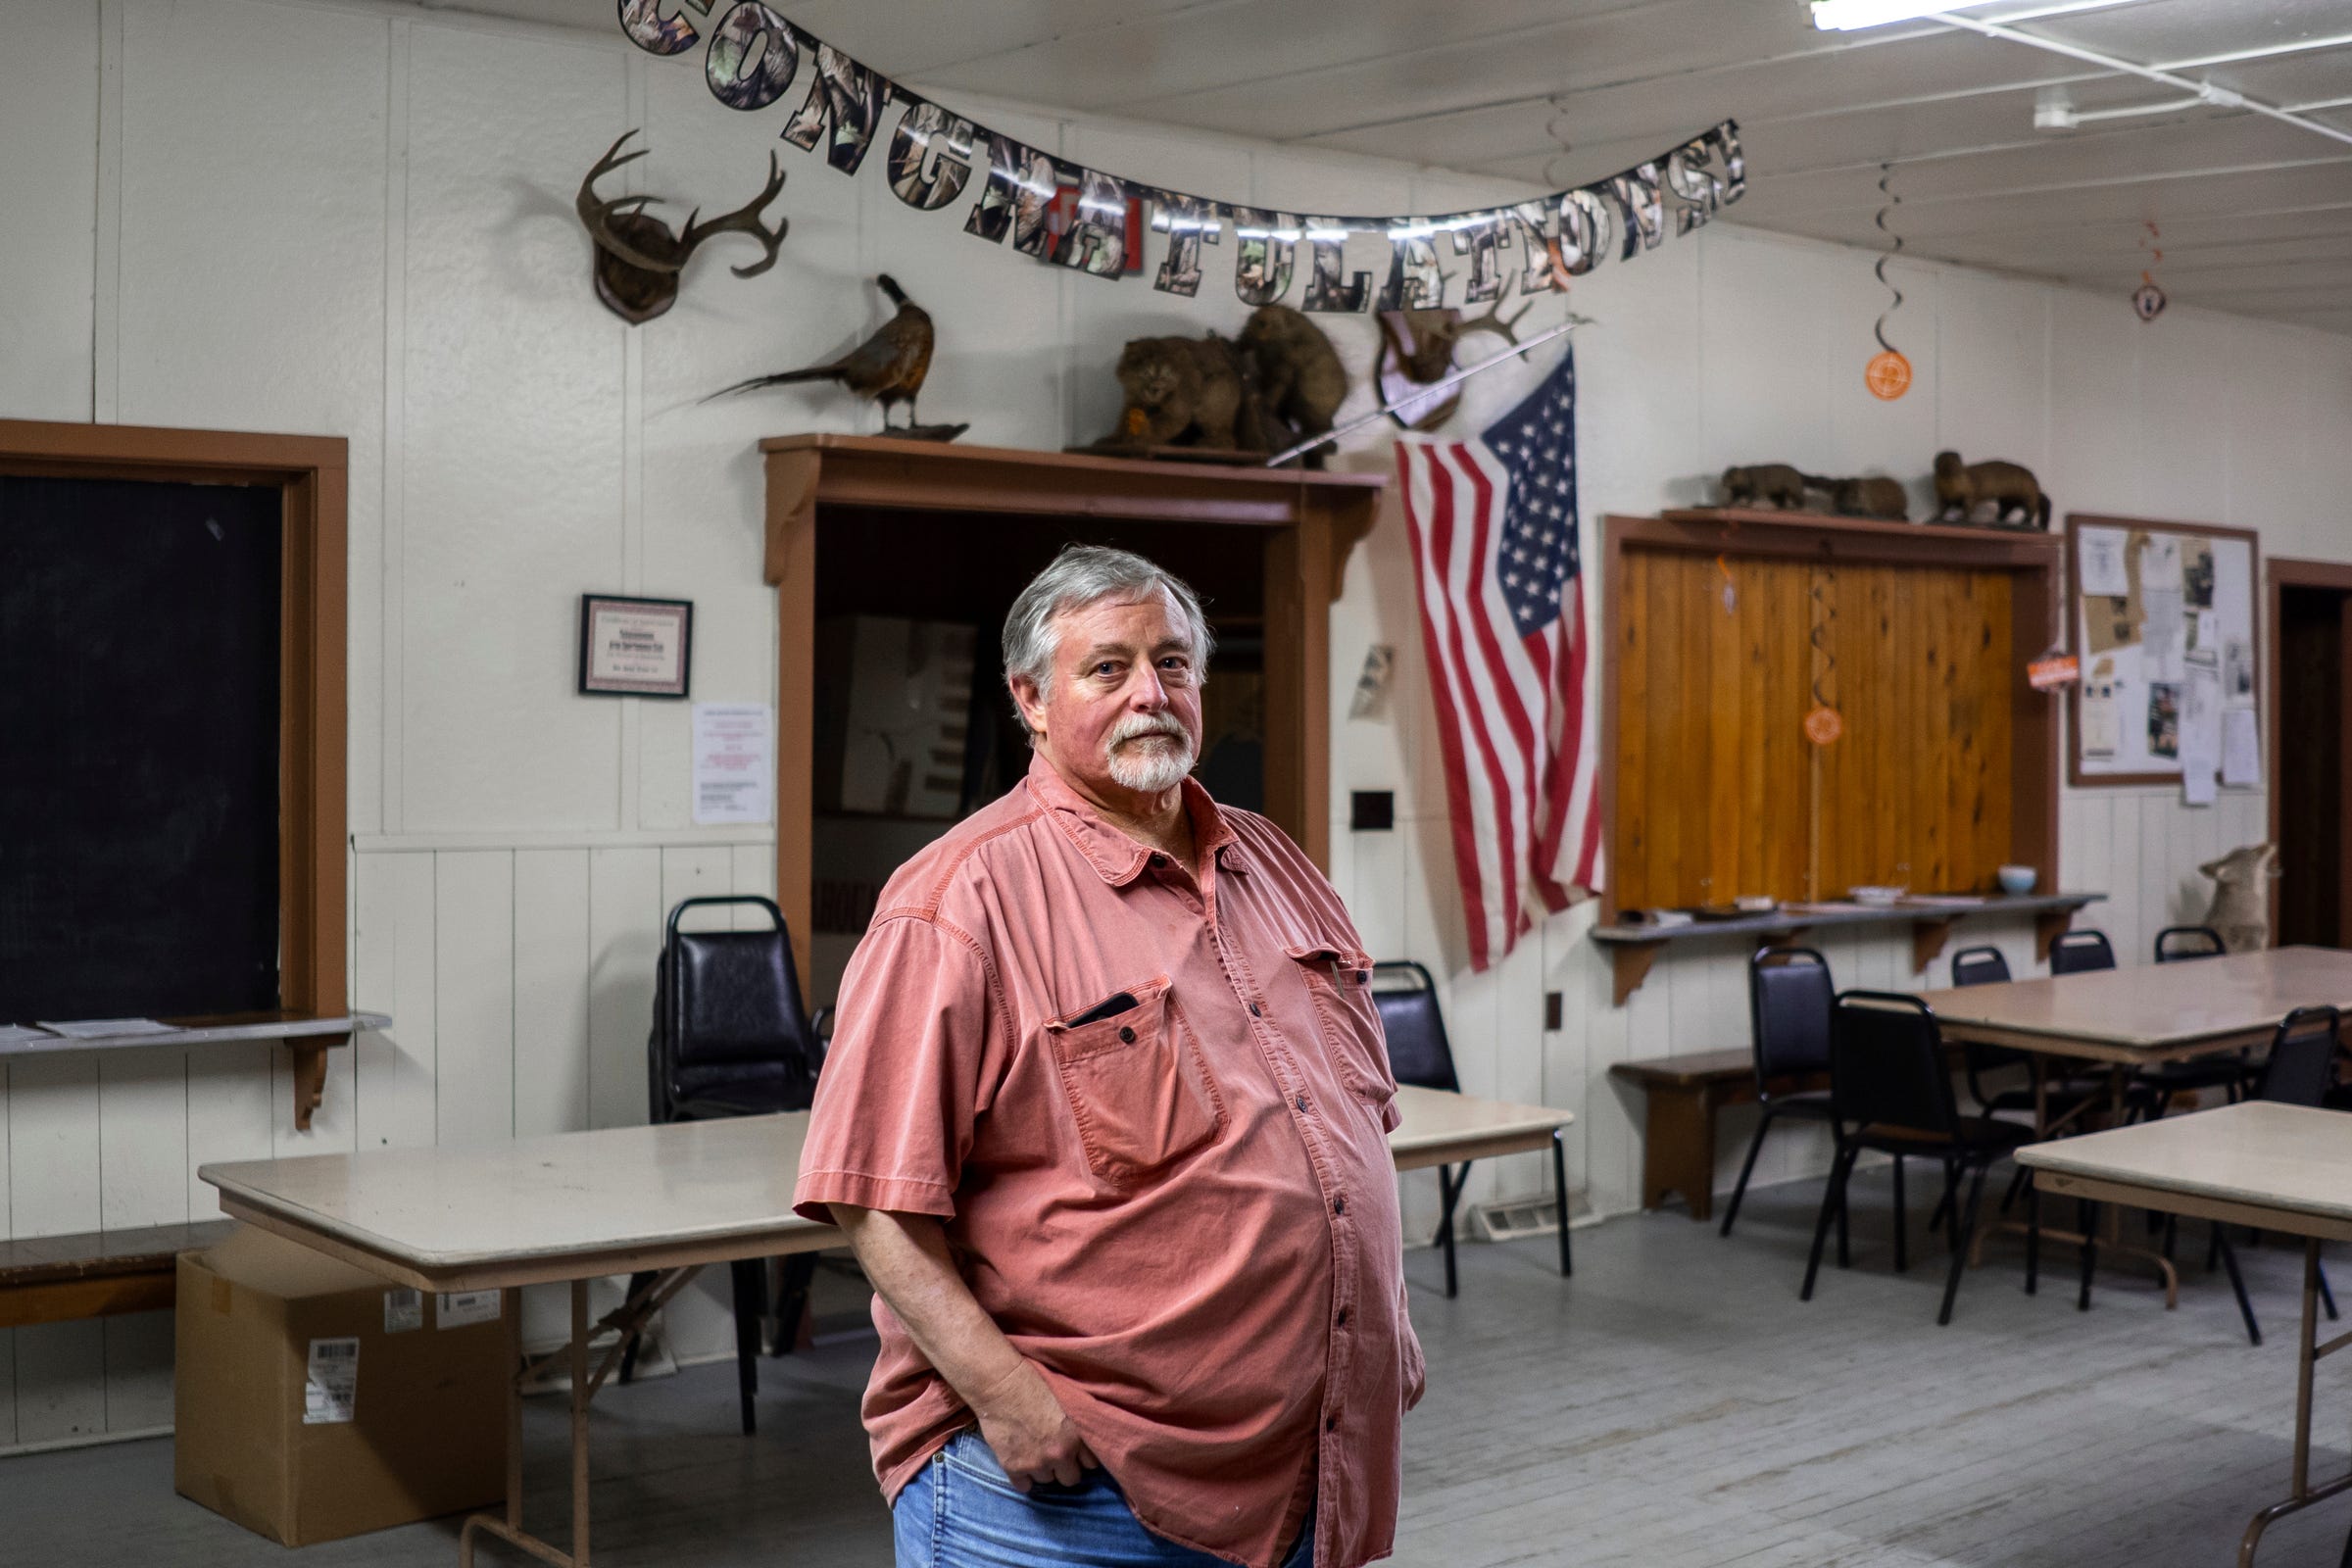 Terry Trepanier, 68, stands inside the Tahquamenon Sportsmen's Club in Newberry on Saturday, April 22, 2023, in Michigan's Upper Peninsula. He was named president of the club a few years ago during only his second meeting.